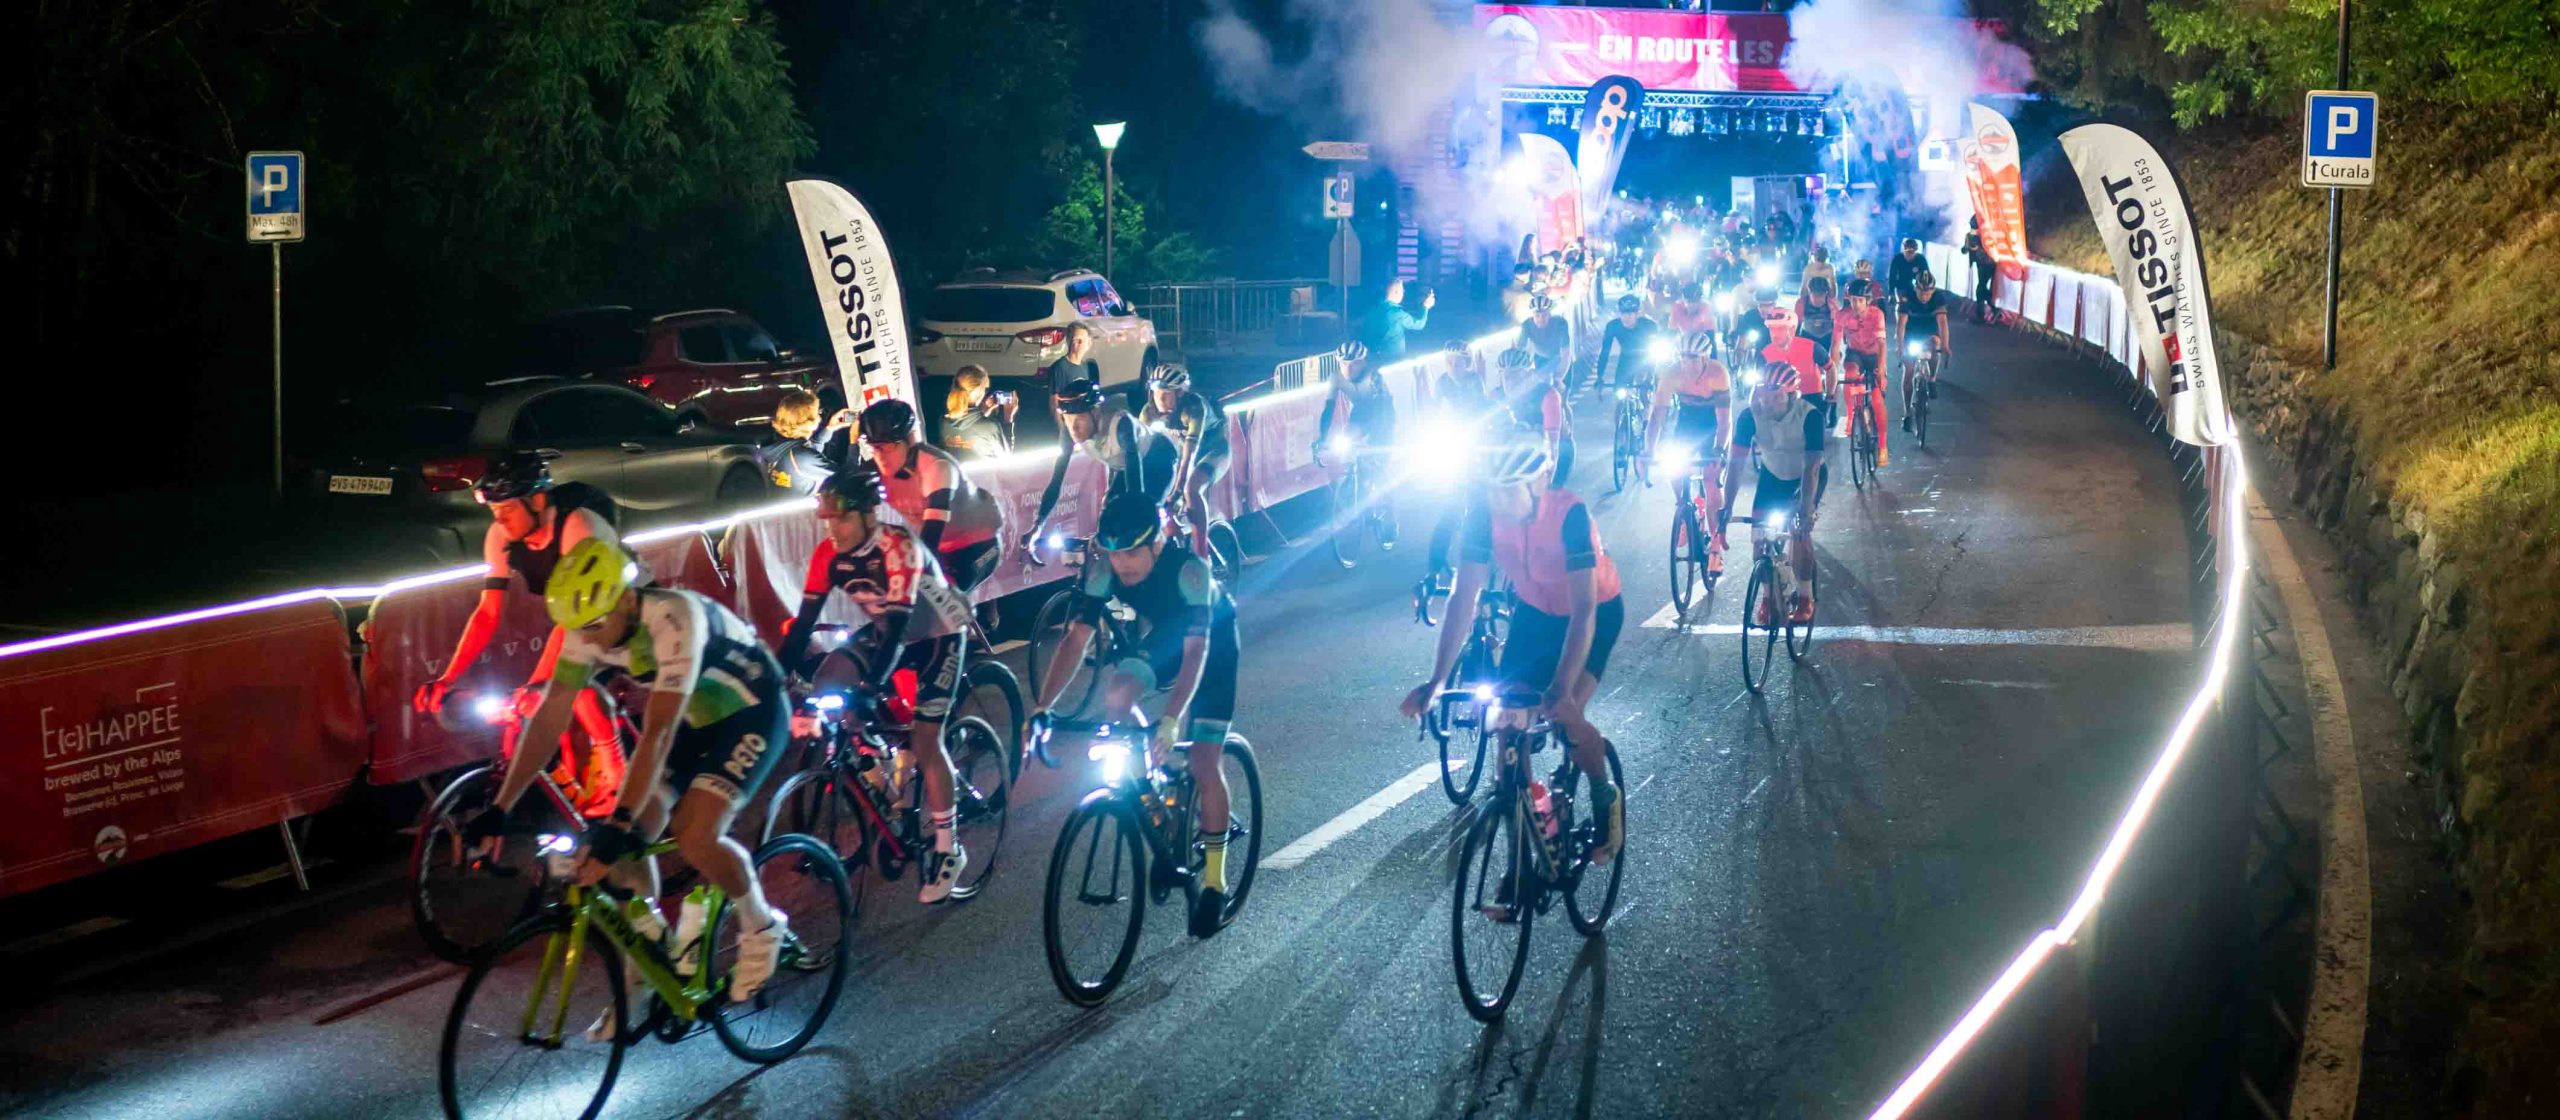 Cyclists in the dark at start of Tour des Stations cycling event in Switzerland